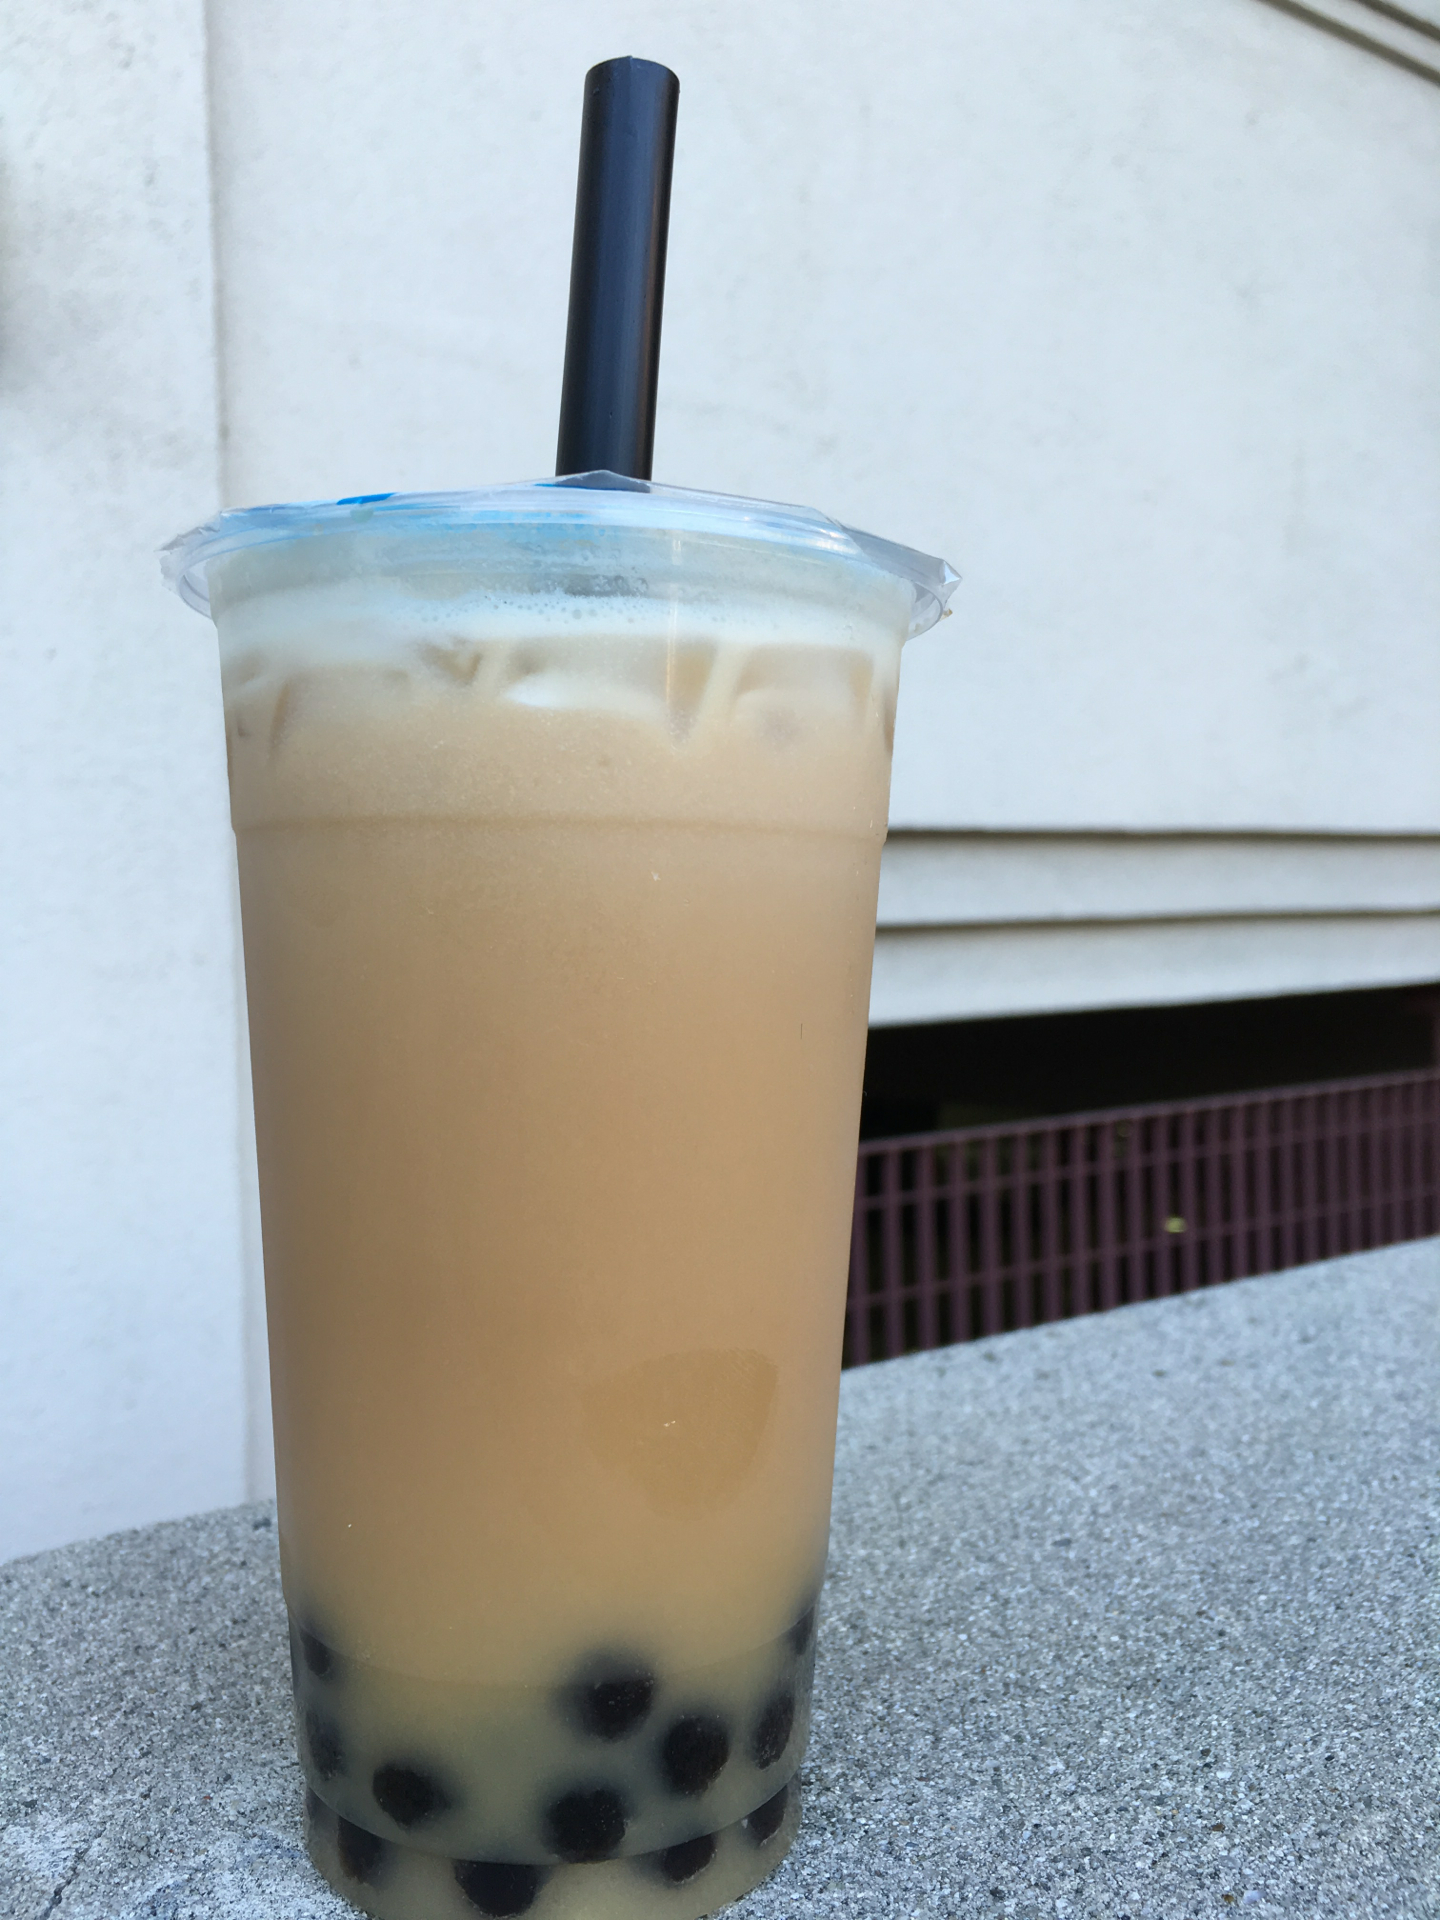 Lychee milk tea from Verde Tea Cafe in Mountain View.